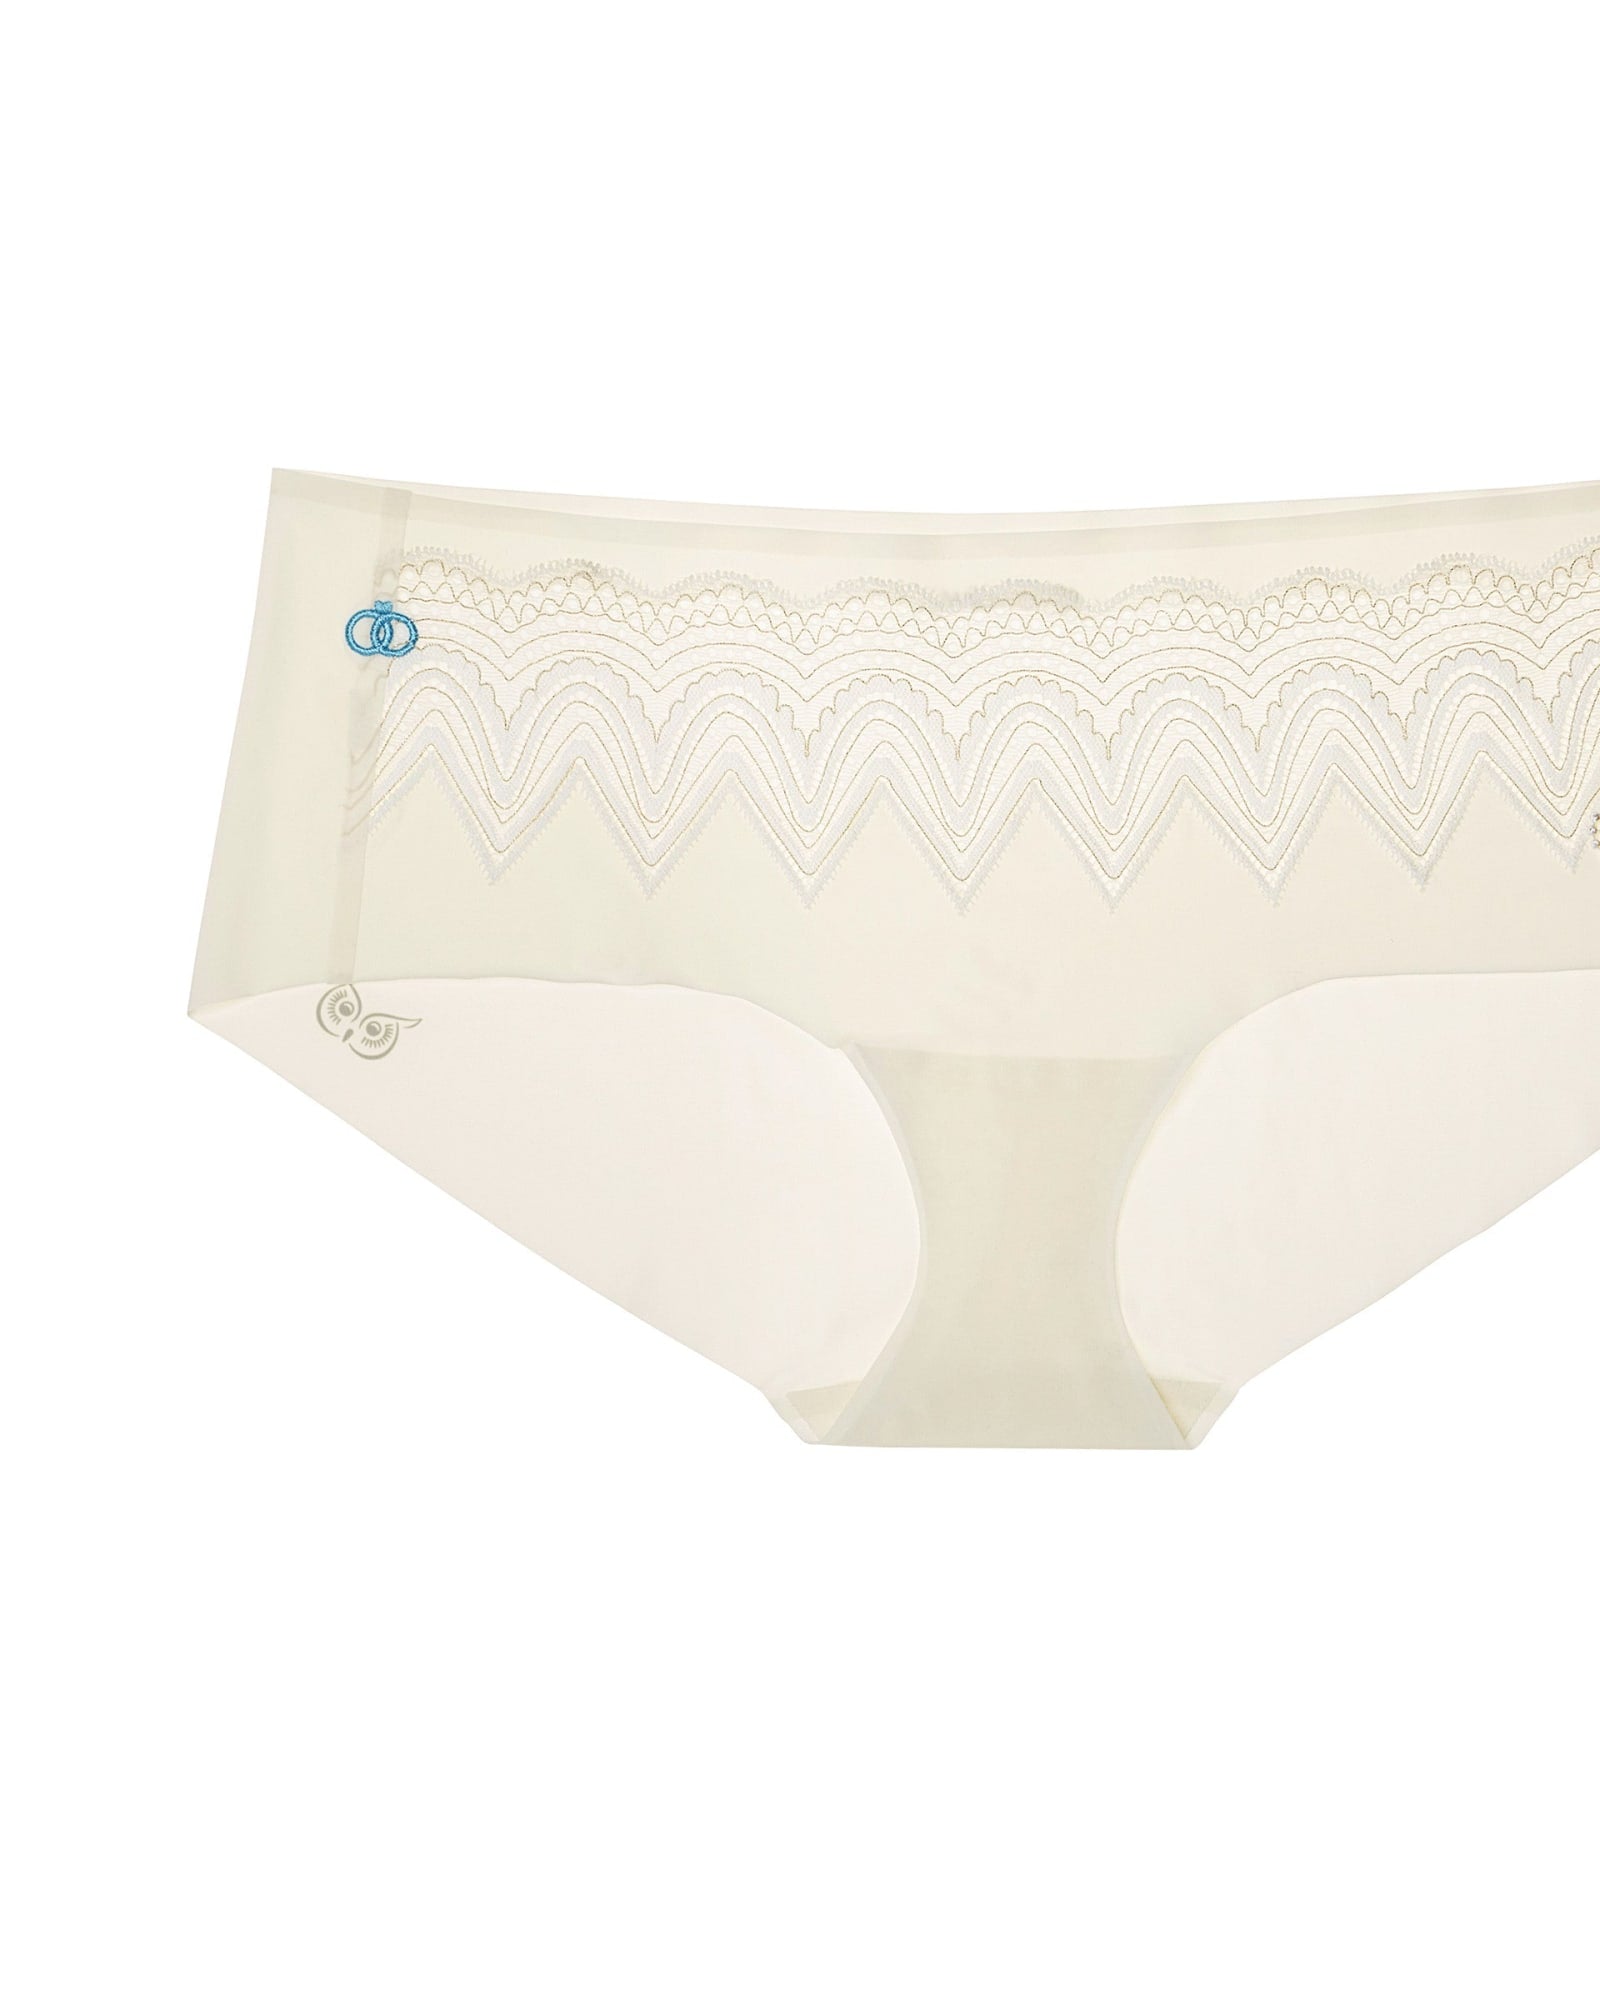 What to Look for In Lace Underwear – Uwila Warrior